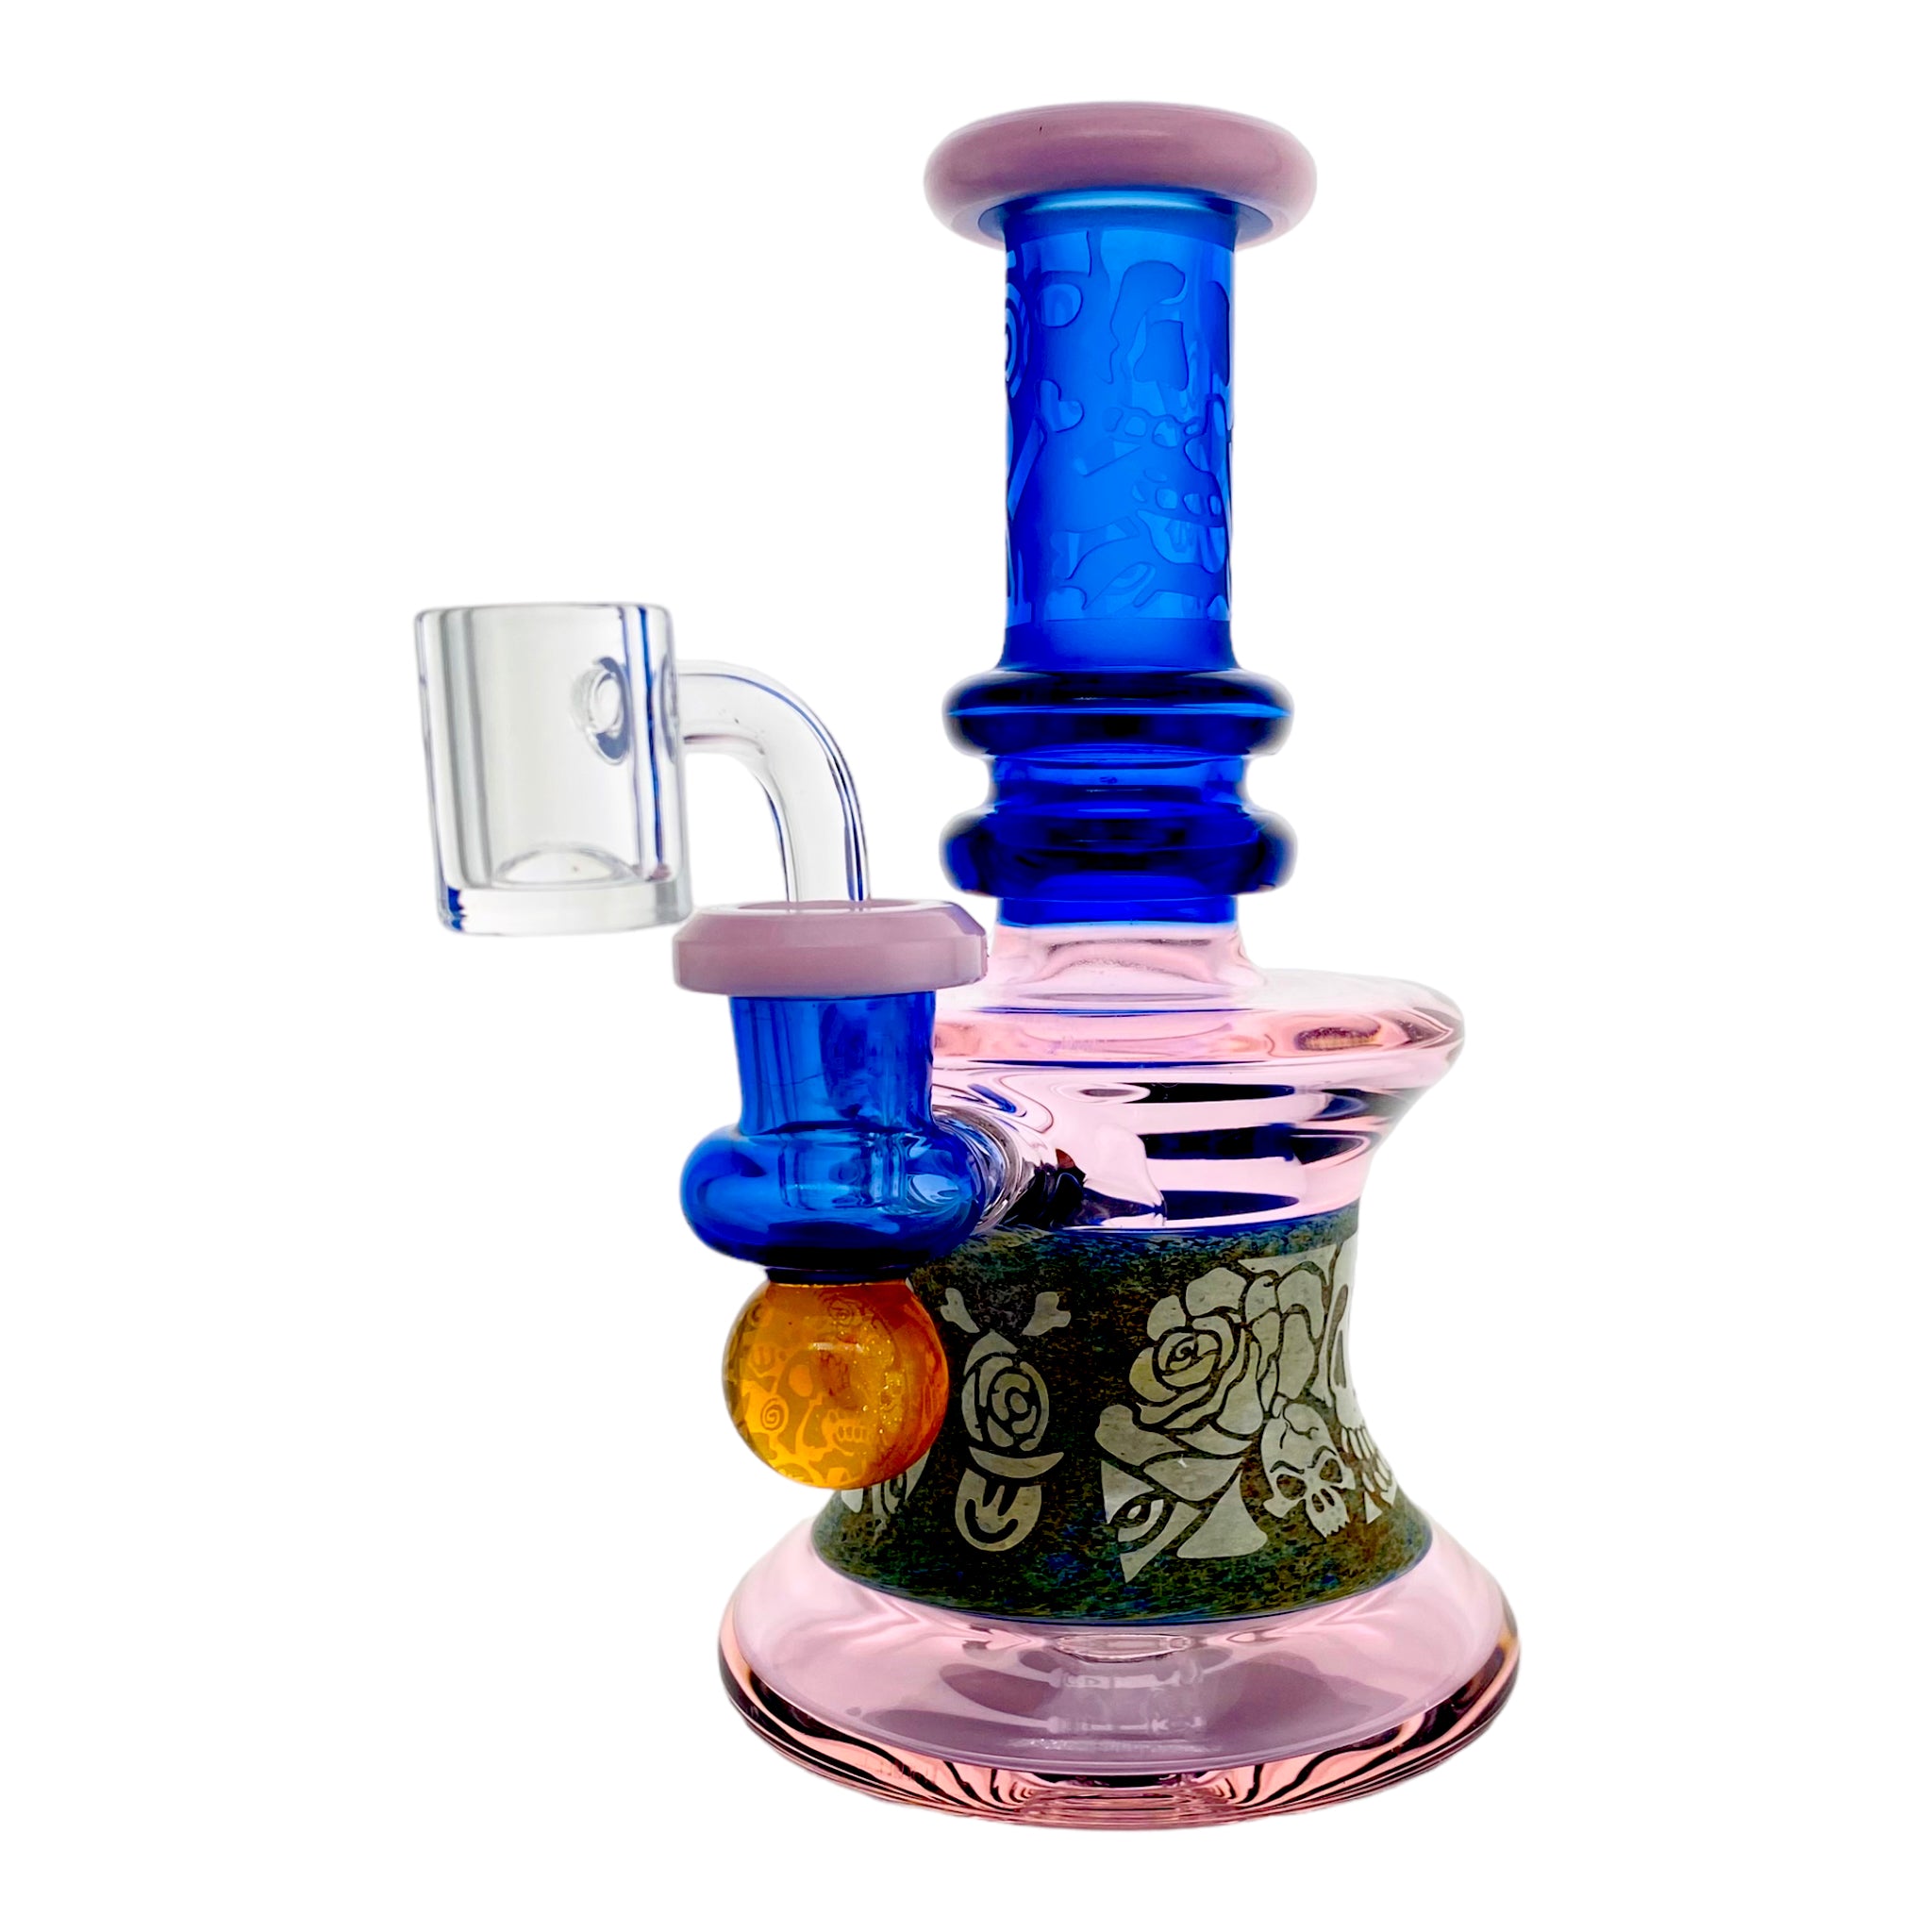 Pink And Blue Dab Rig With Sand Blasted Skulls And Roses